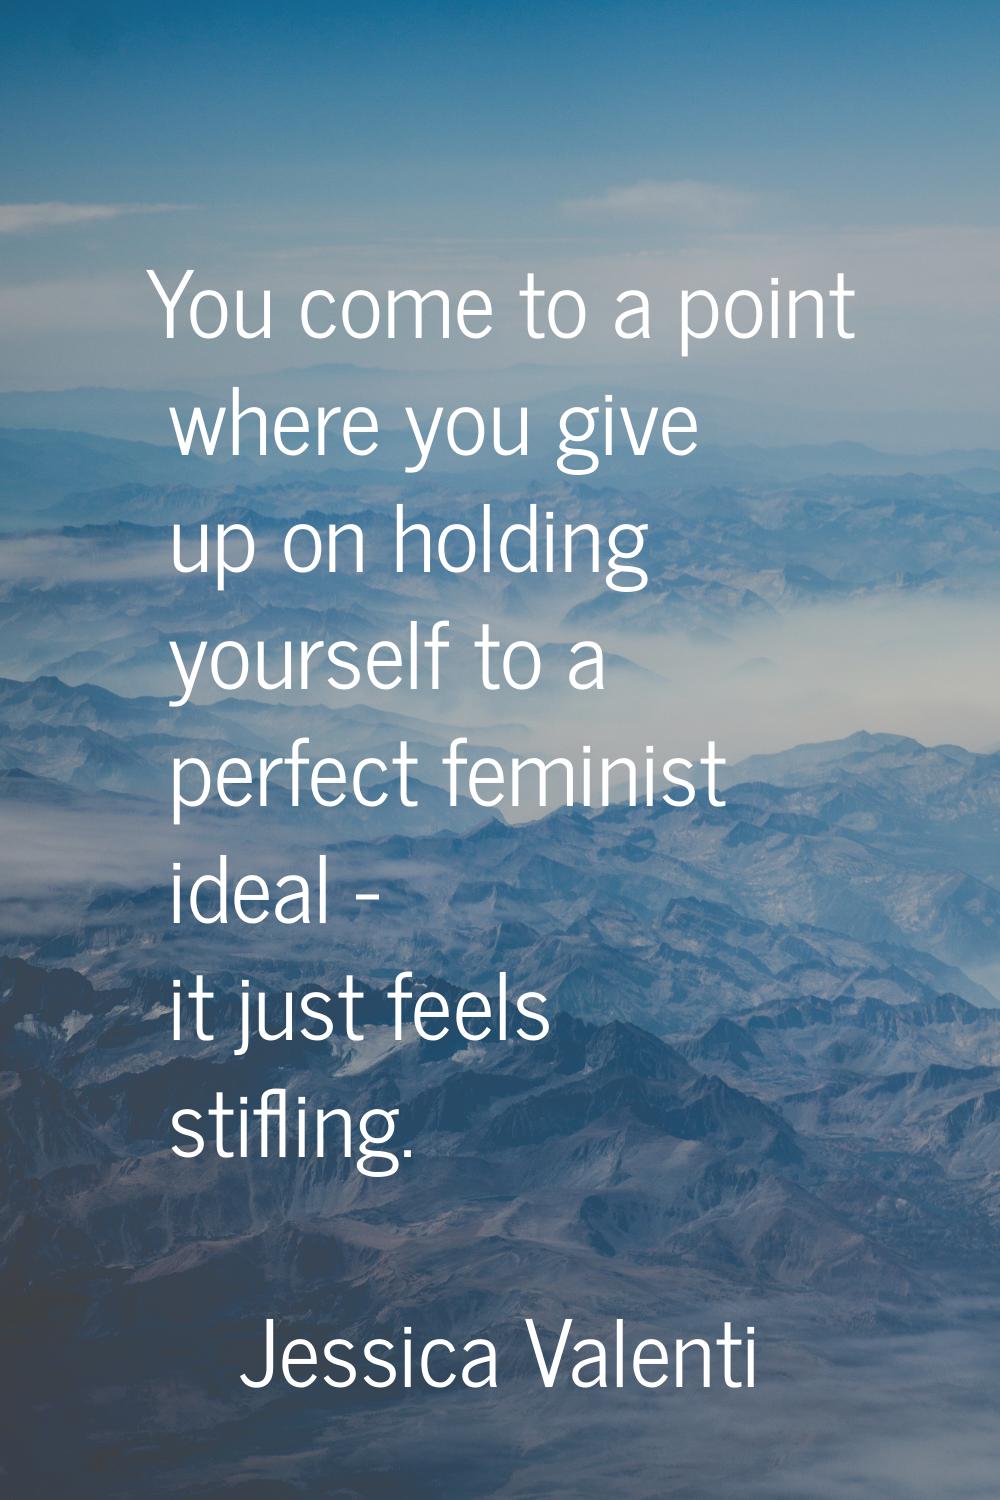 You come to a point where you give up on holding yourself to a perfect feminist ideal - it just fee